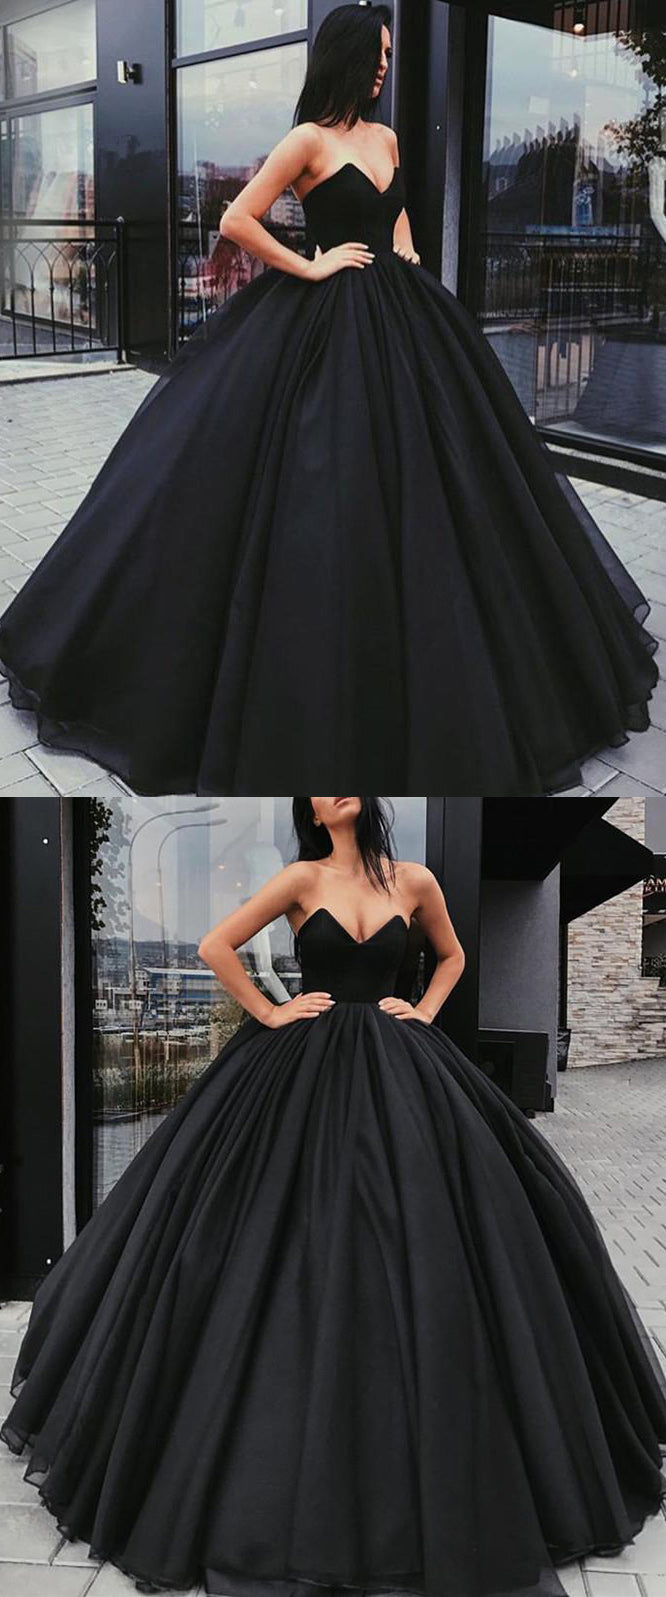 Fashion Black Prom Queen masquerade Gown Ball Dance Gown Poofy Long Ev ...